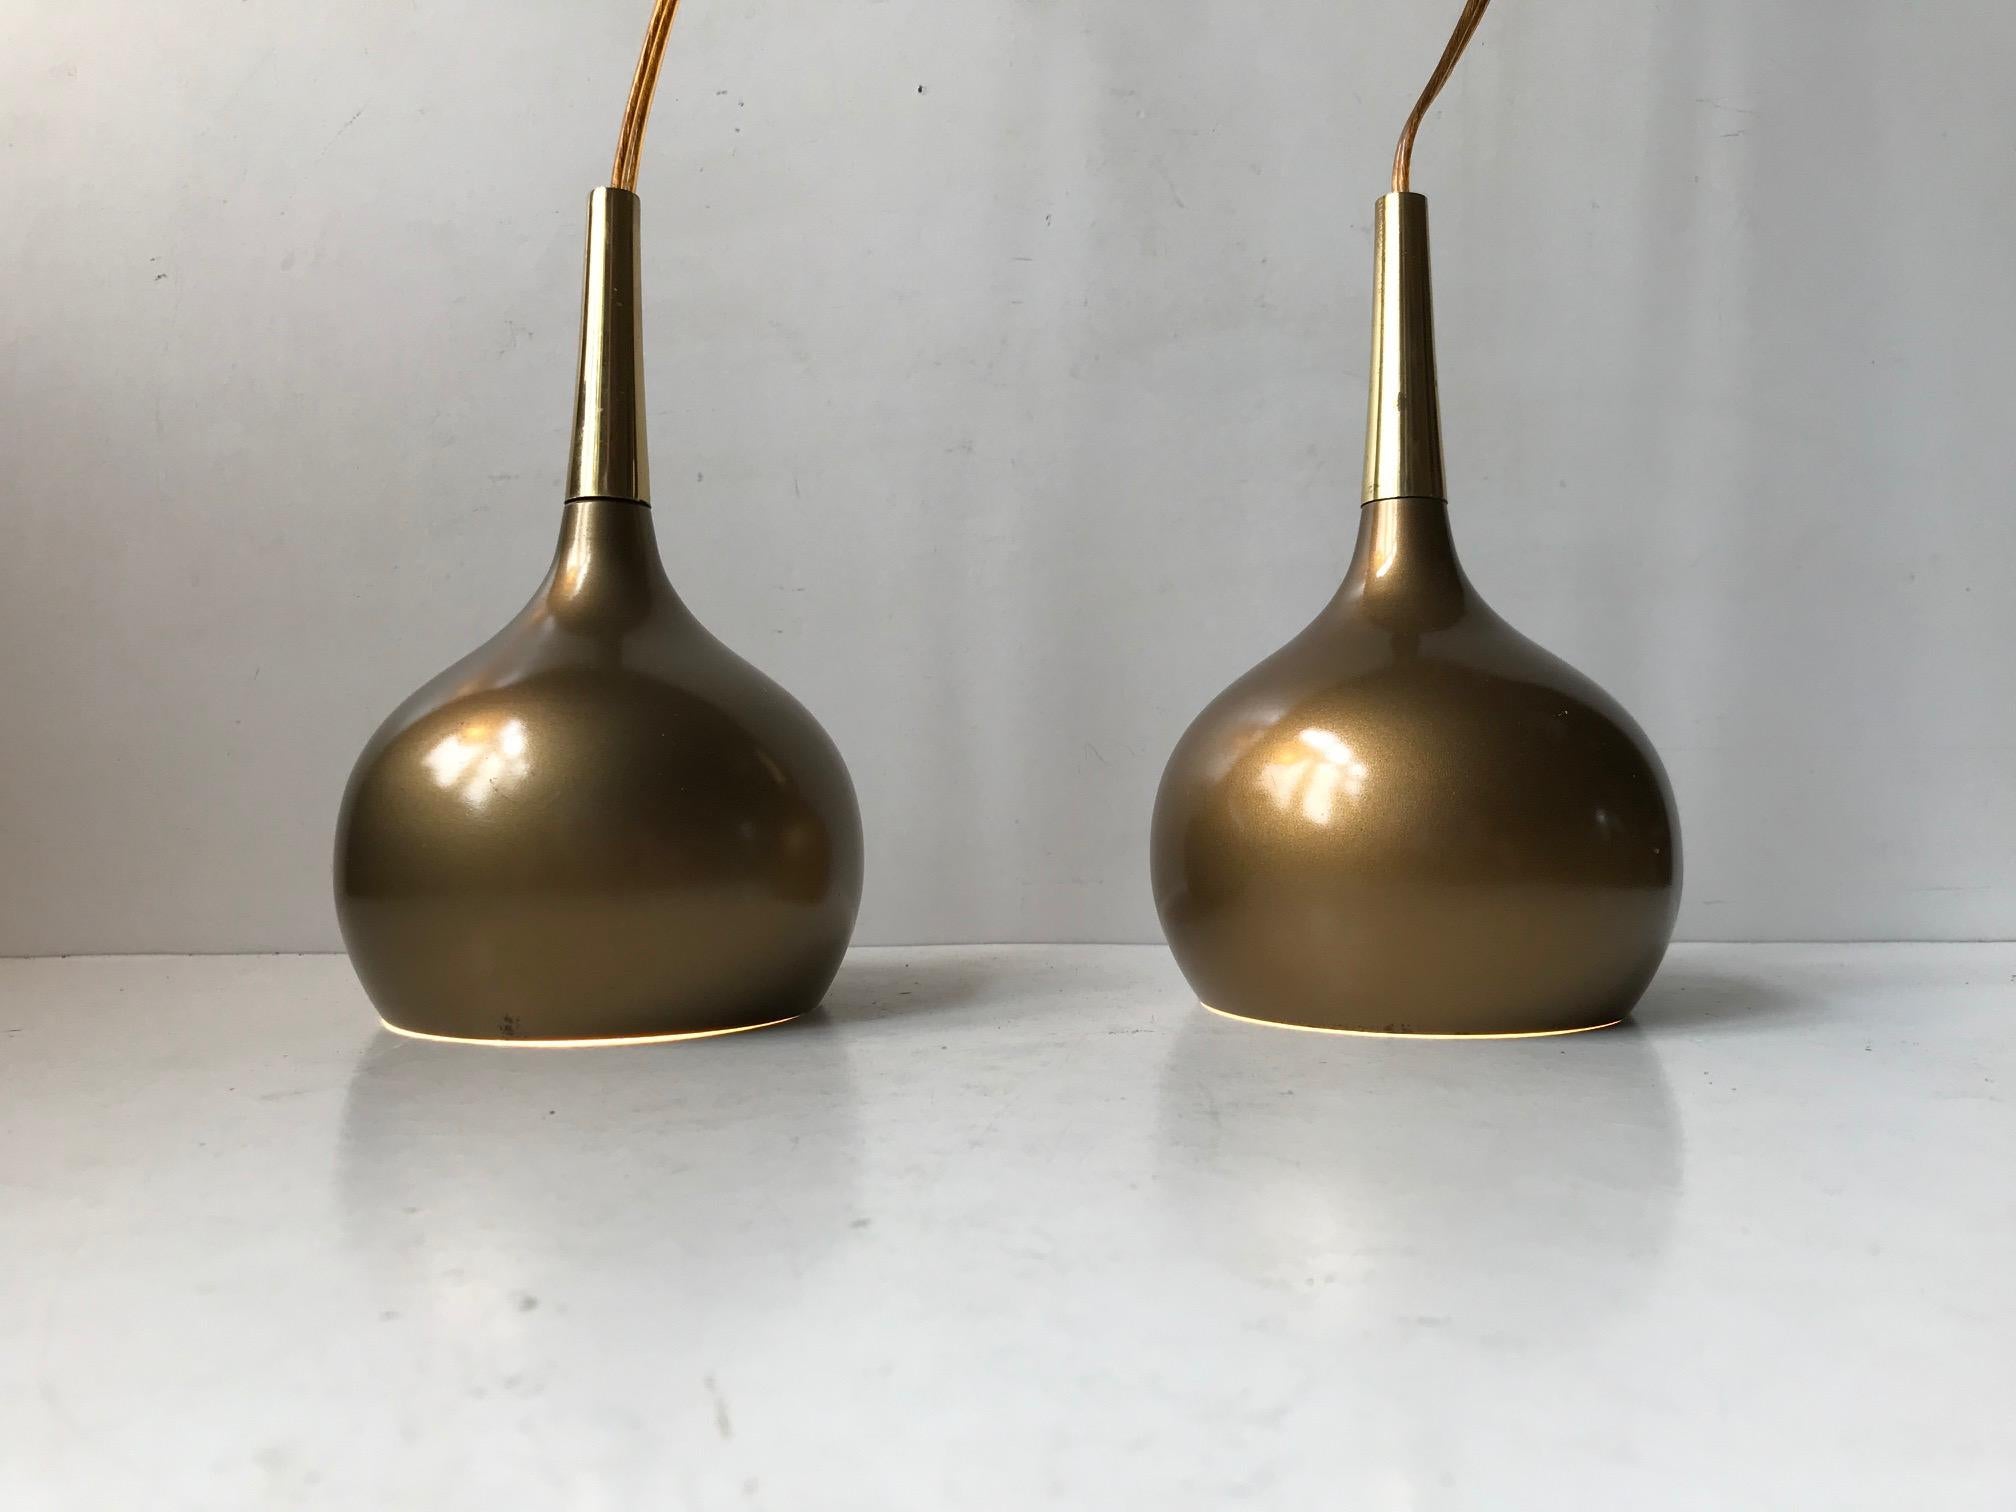 A set of onion shaped pendant ceiling lights by Hans-Agne Jakobsson for Markaryd Sweden, 1960s. They feature a solid brass top/tube and a gold-lacquered shade with white reflective interior. Suitable for kitchen, cosy corner lightning, over your mid